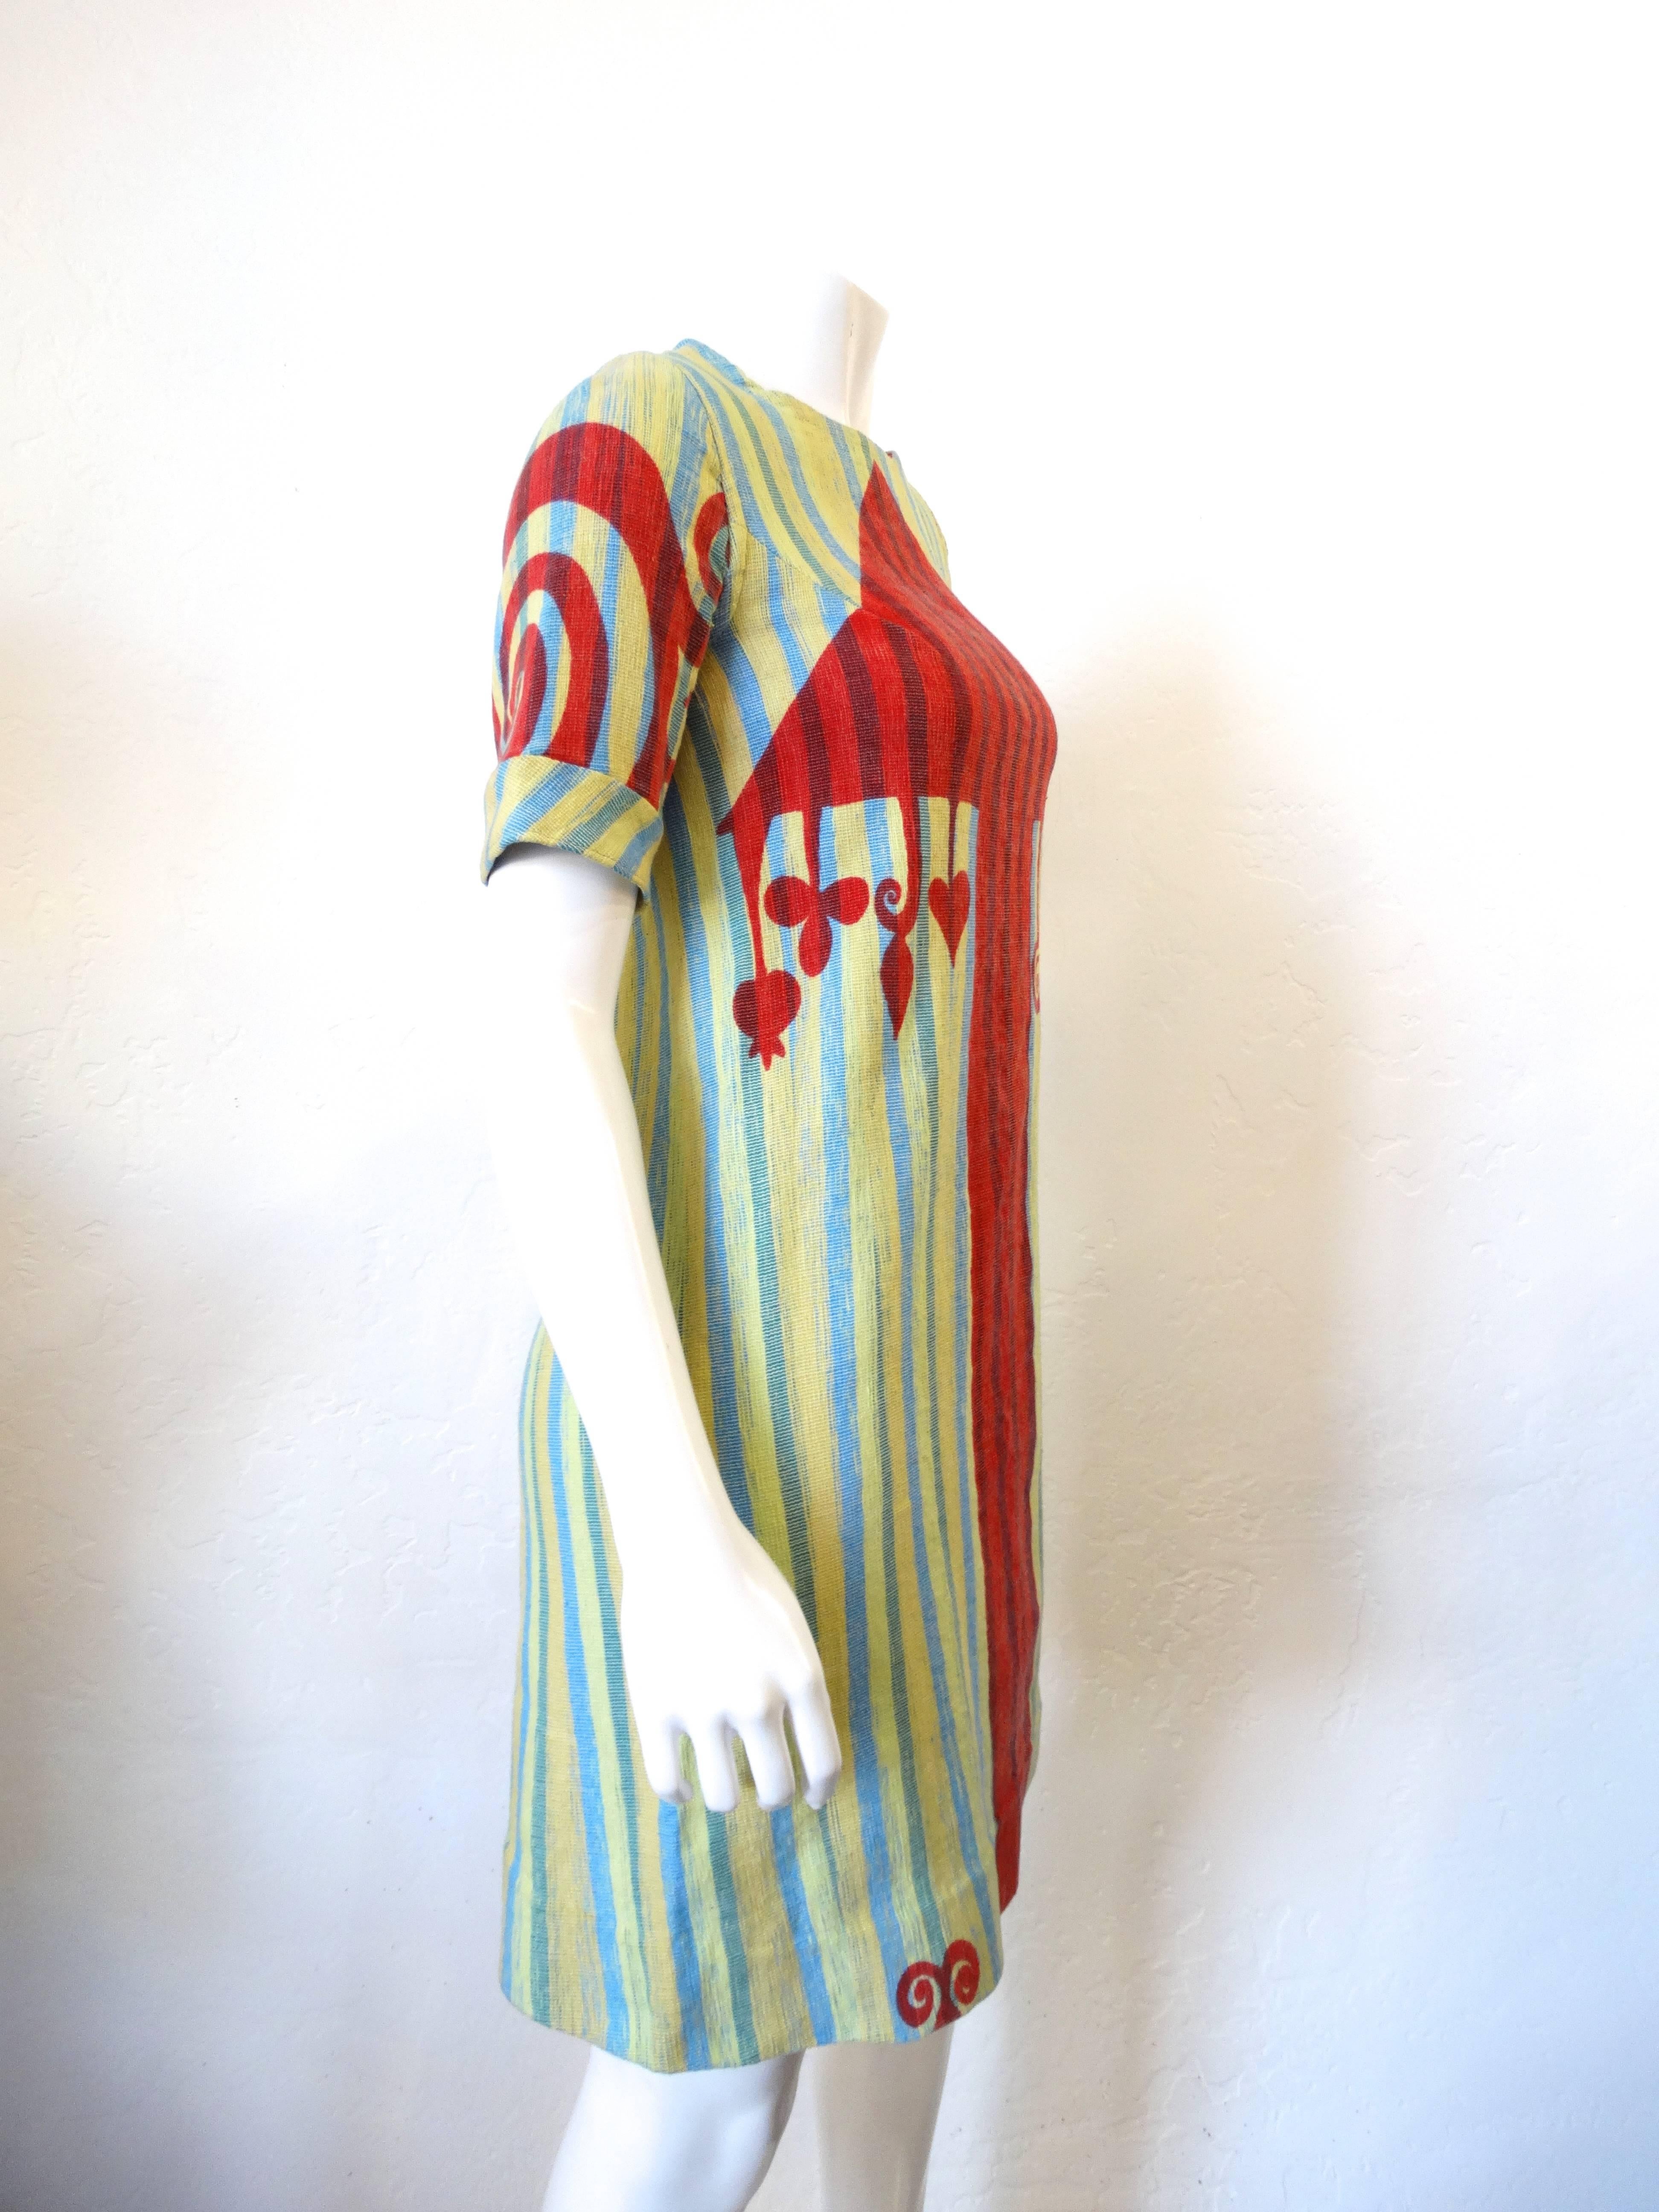 The most incredible 1970s Rikma by Rosi Ben Yosef mini dress! Made of thick, quality woven cotton with multicolored stripe pattern and red arrow graphic up the front. Short sleeves with a mini fit- zips up the back for easy on and off! Fits a size